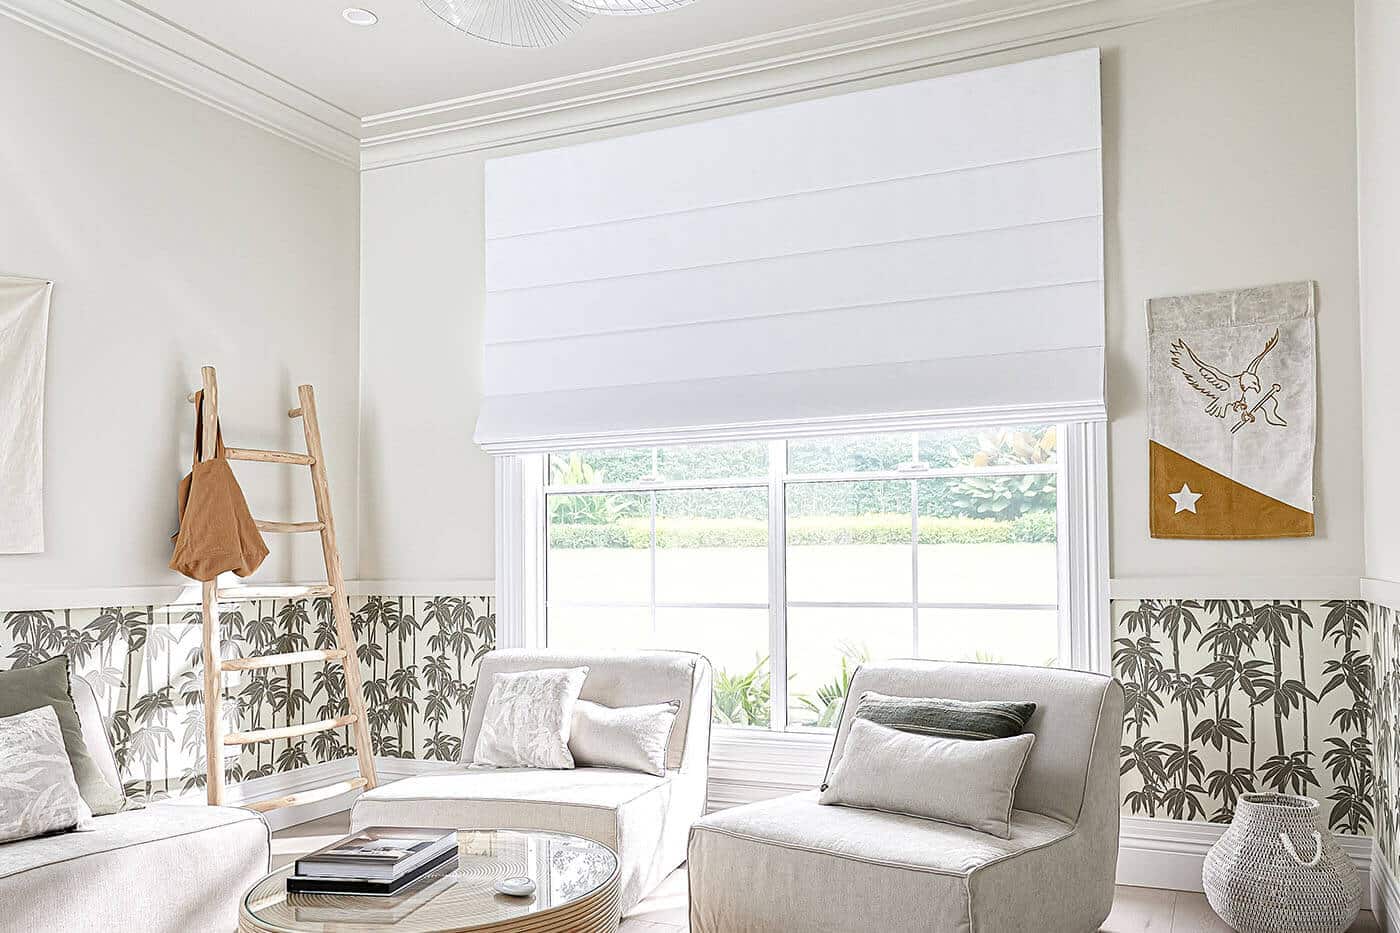 Roman Blinds by Luxaflex in a modern bohemian, comfy and cozy room with bright natural lights.